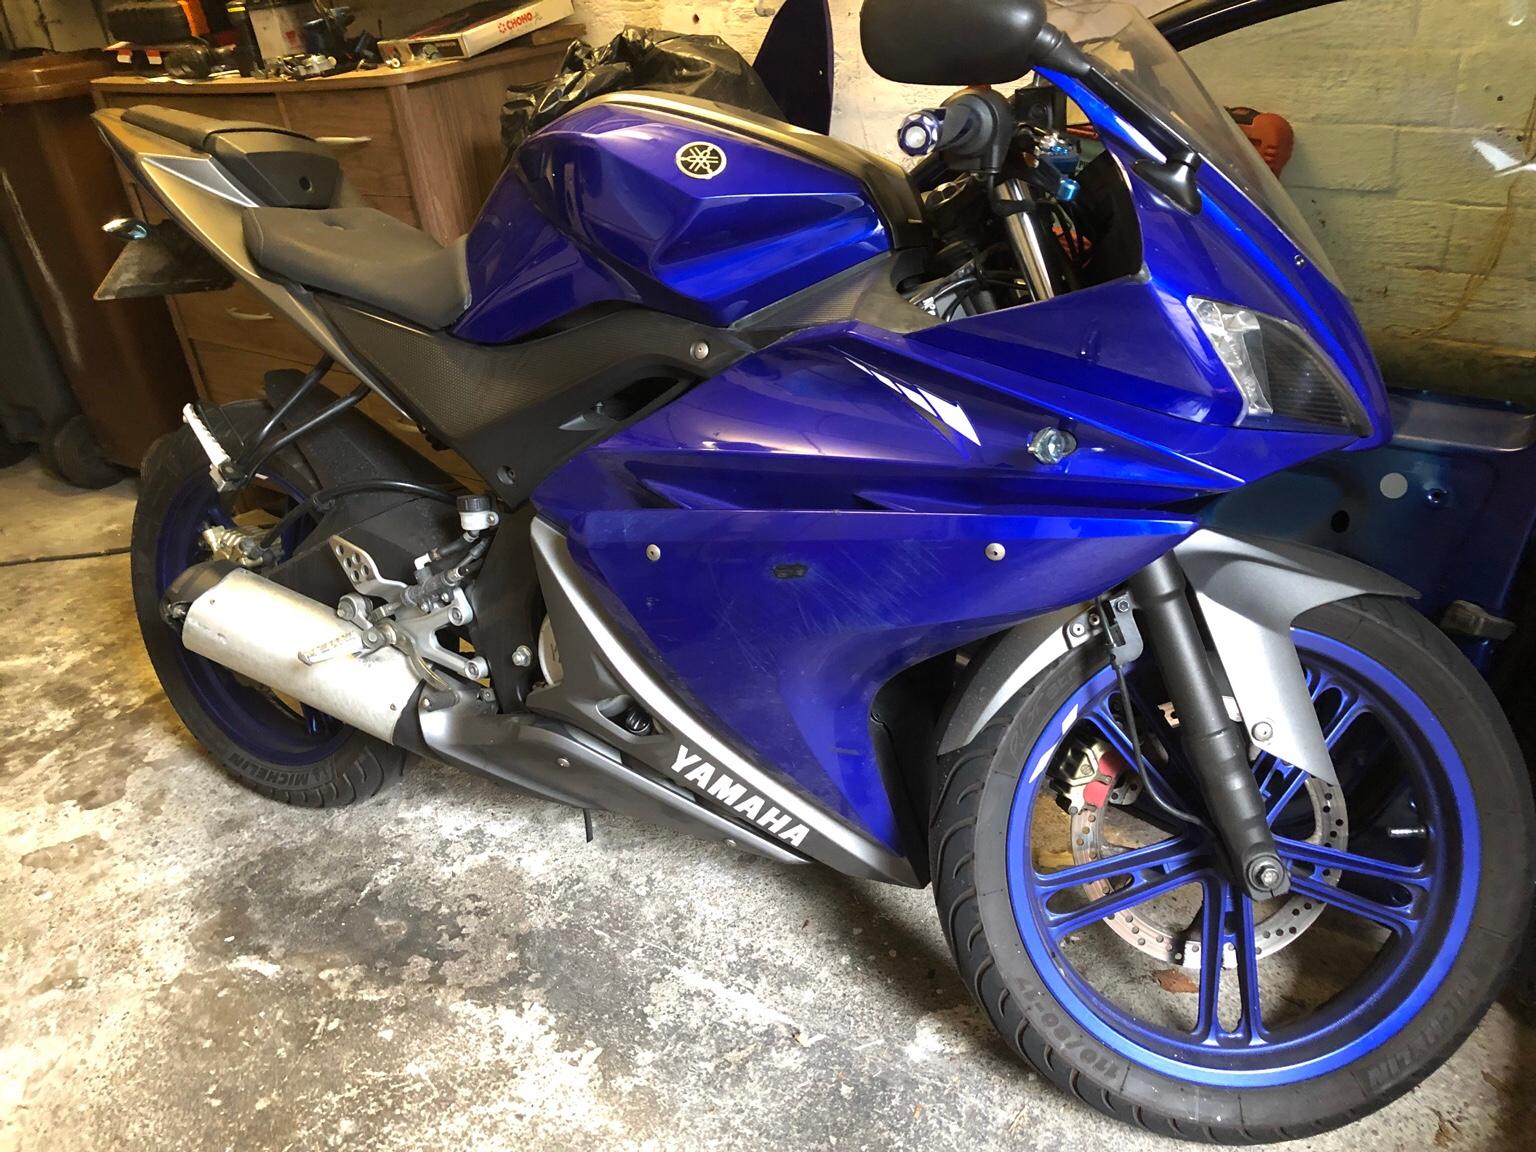 Yamaha Yzf r125 for sale 125cc in M25 